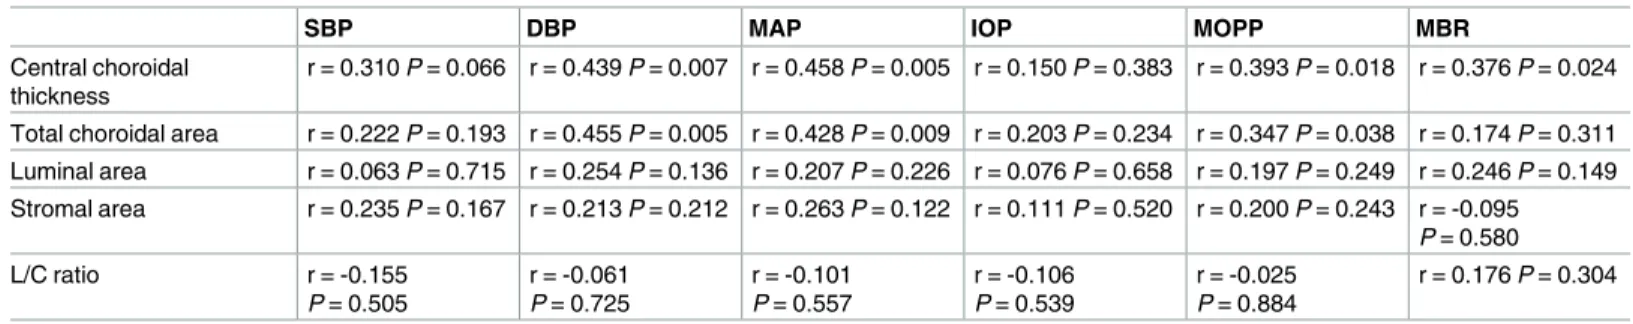 Table 3. Correlations of changing rate of OCT parameters with those of systemic parameters and MBR.